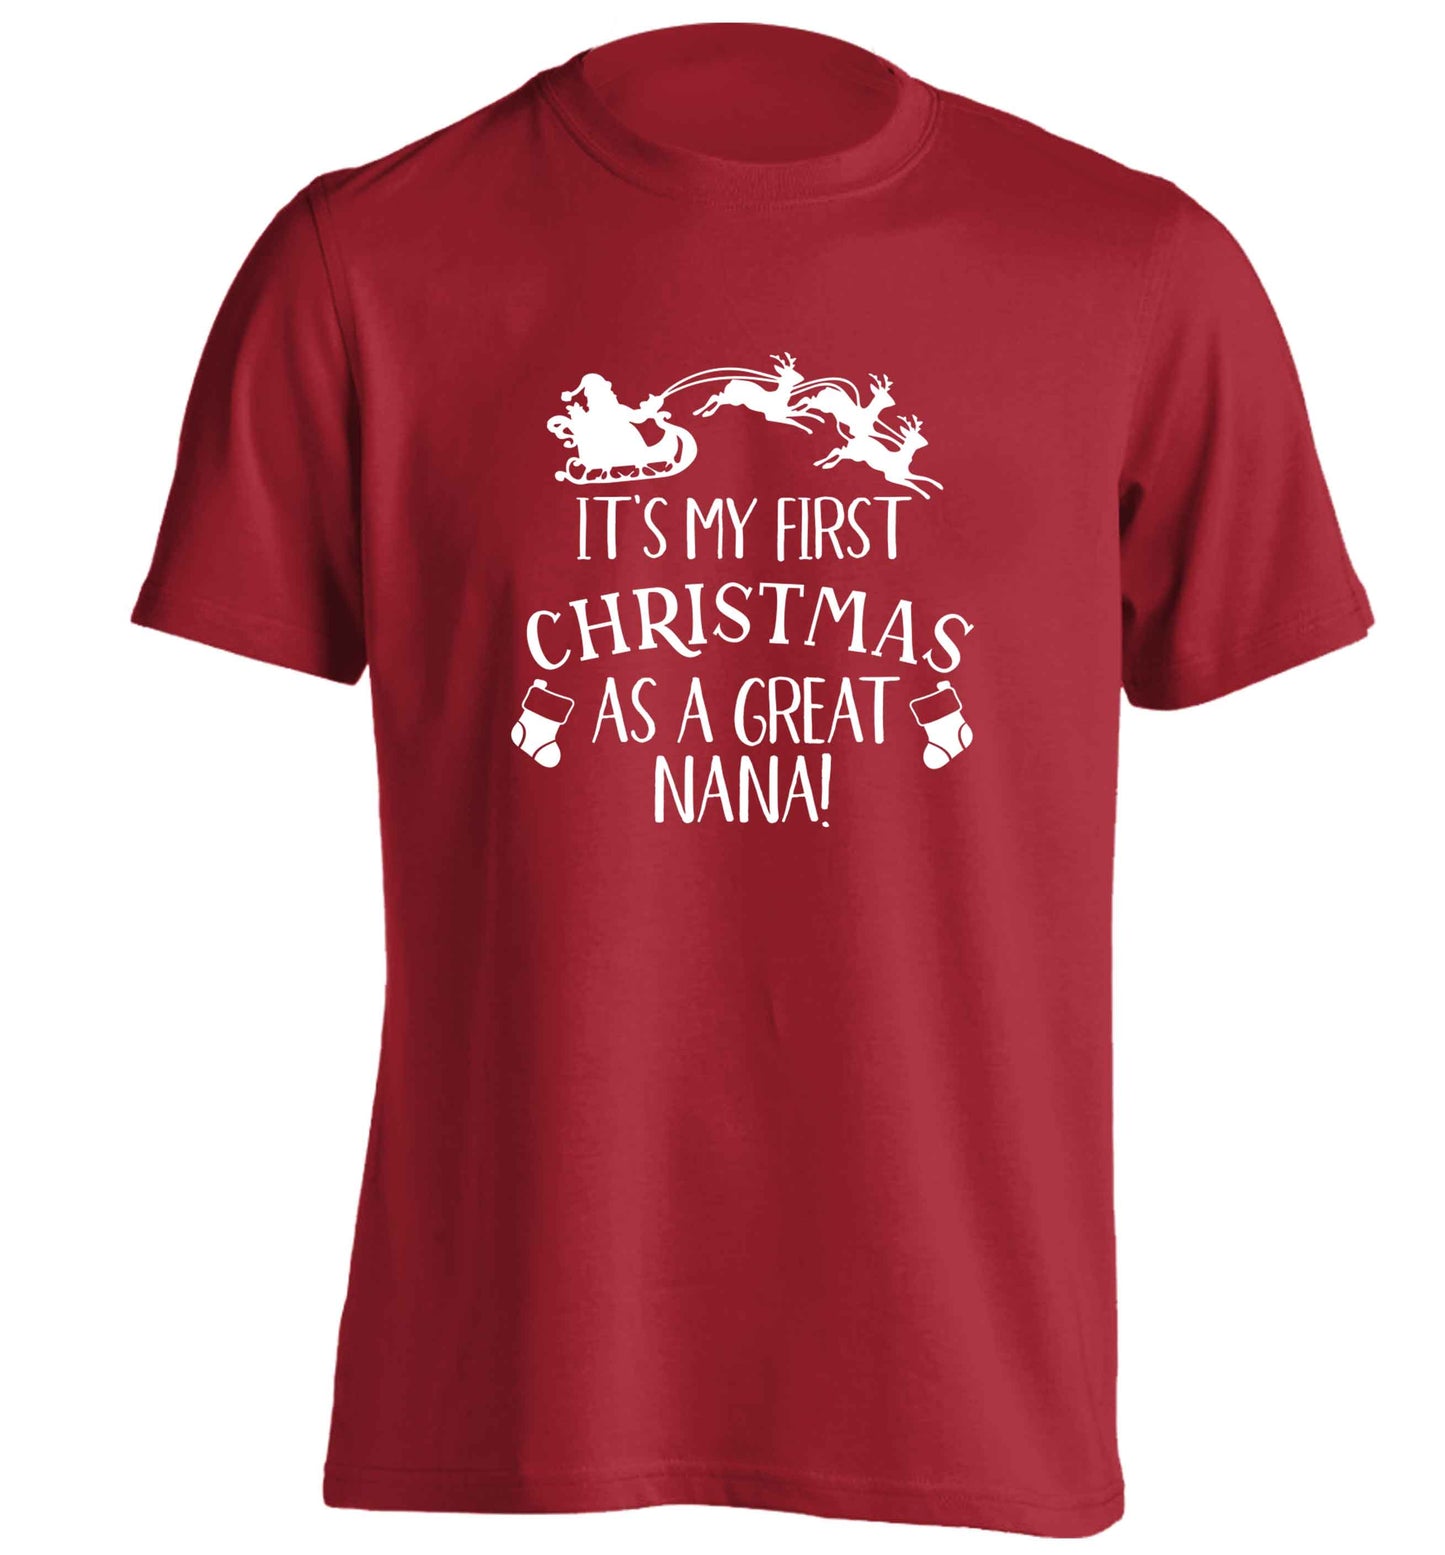 It's my first Christmas as a great nana! adults unisex red Tshirt 2XL